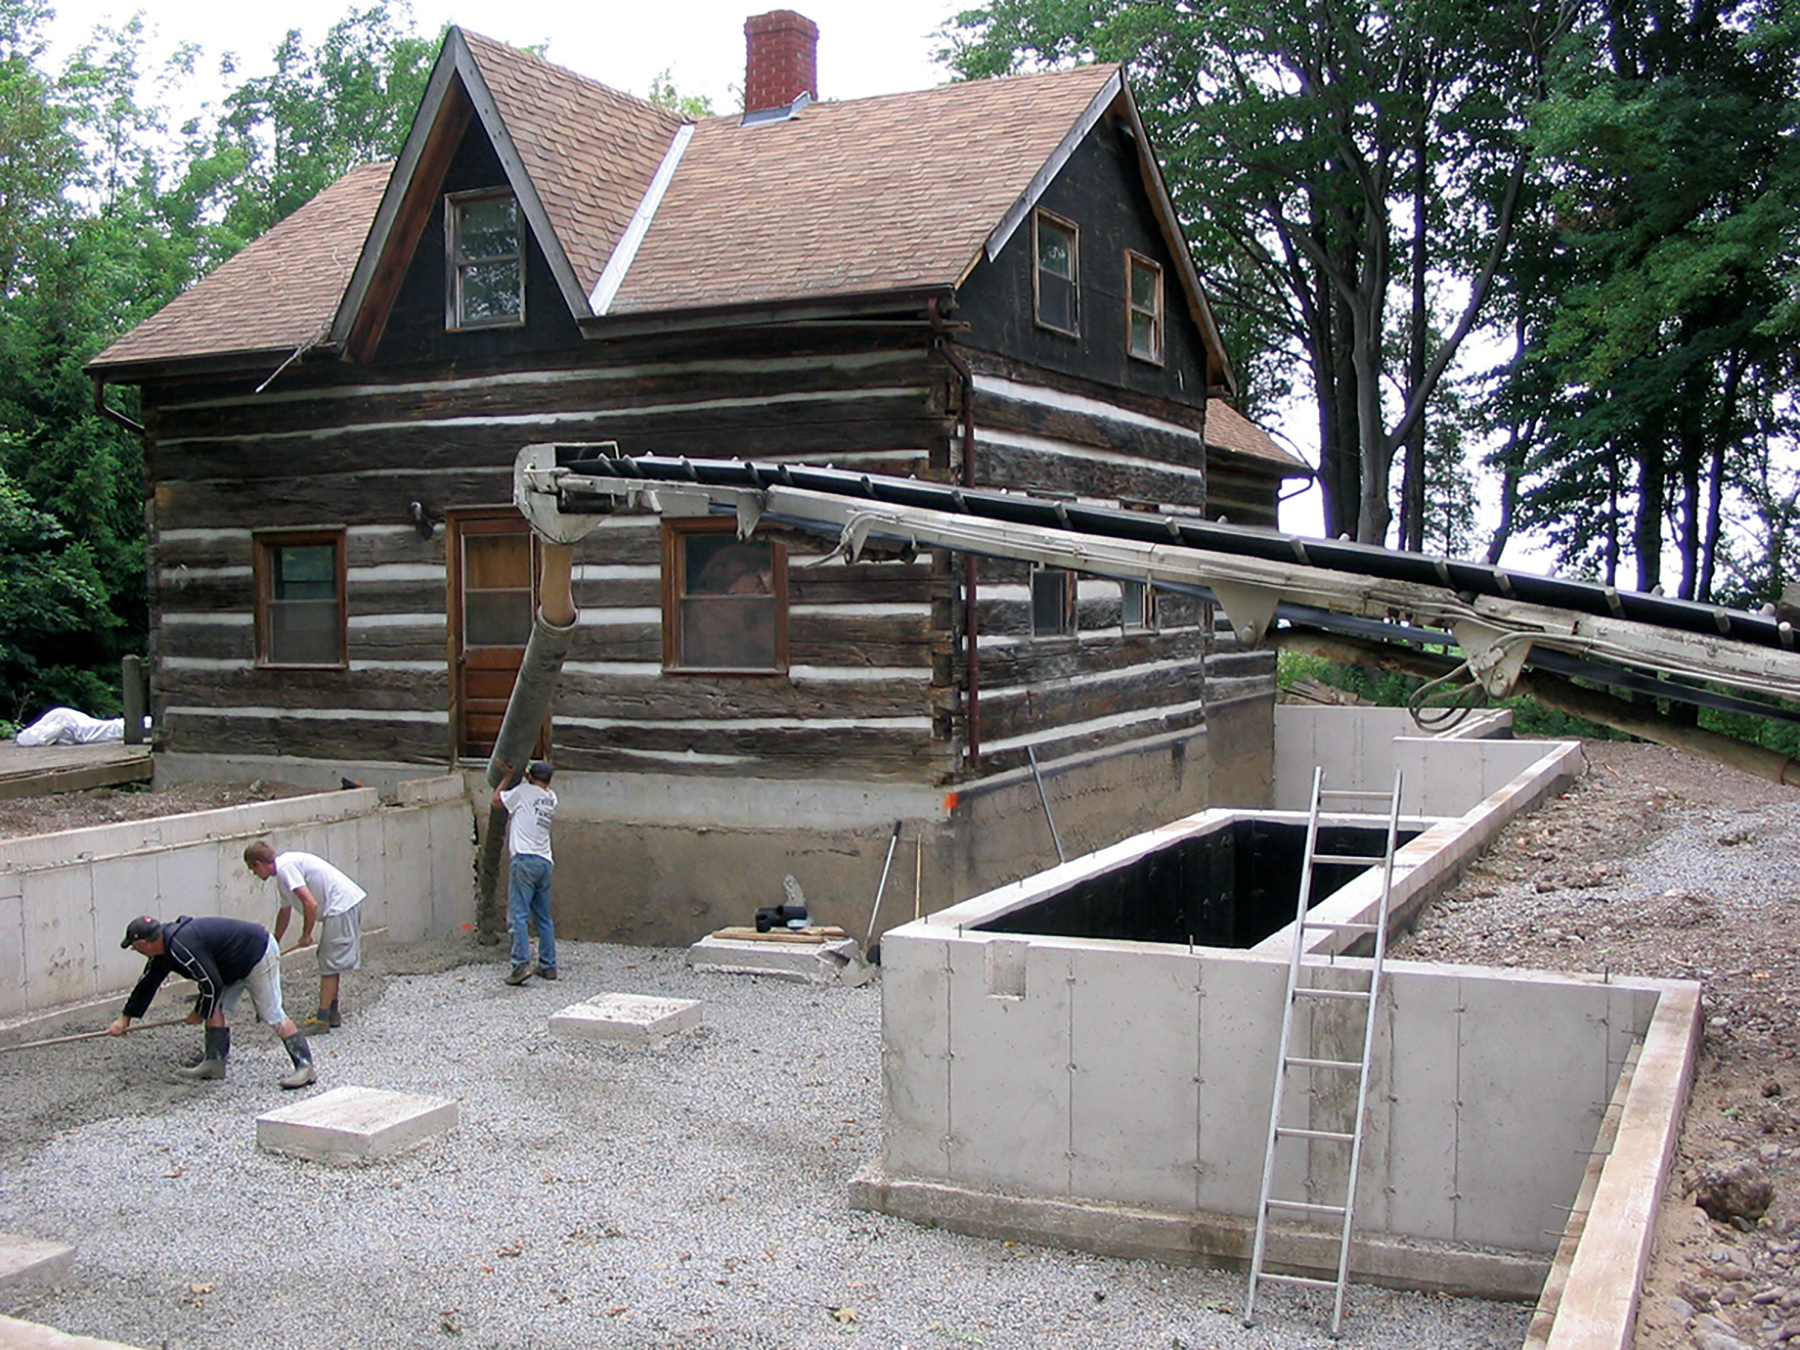 Photos taken during construction show the footprint of the original log cabin (actually two cabins joined together) and the additions Van Strien built around it.